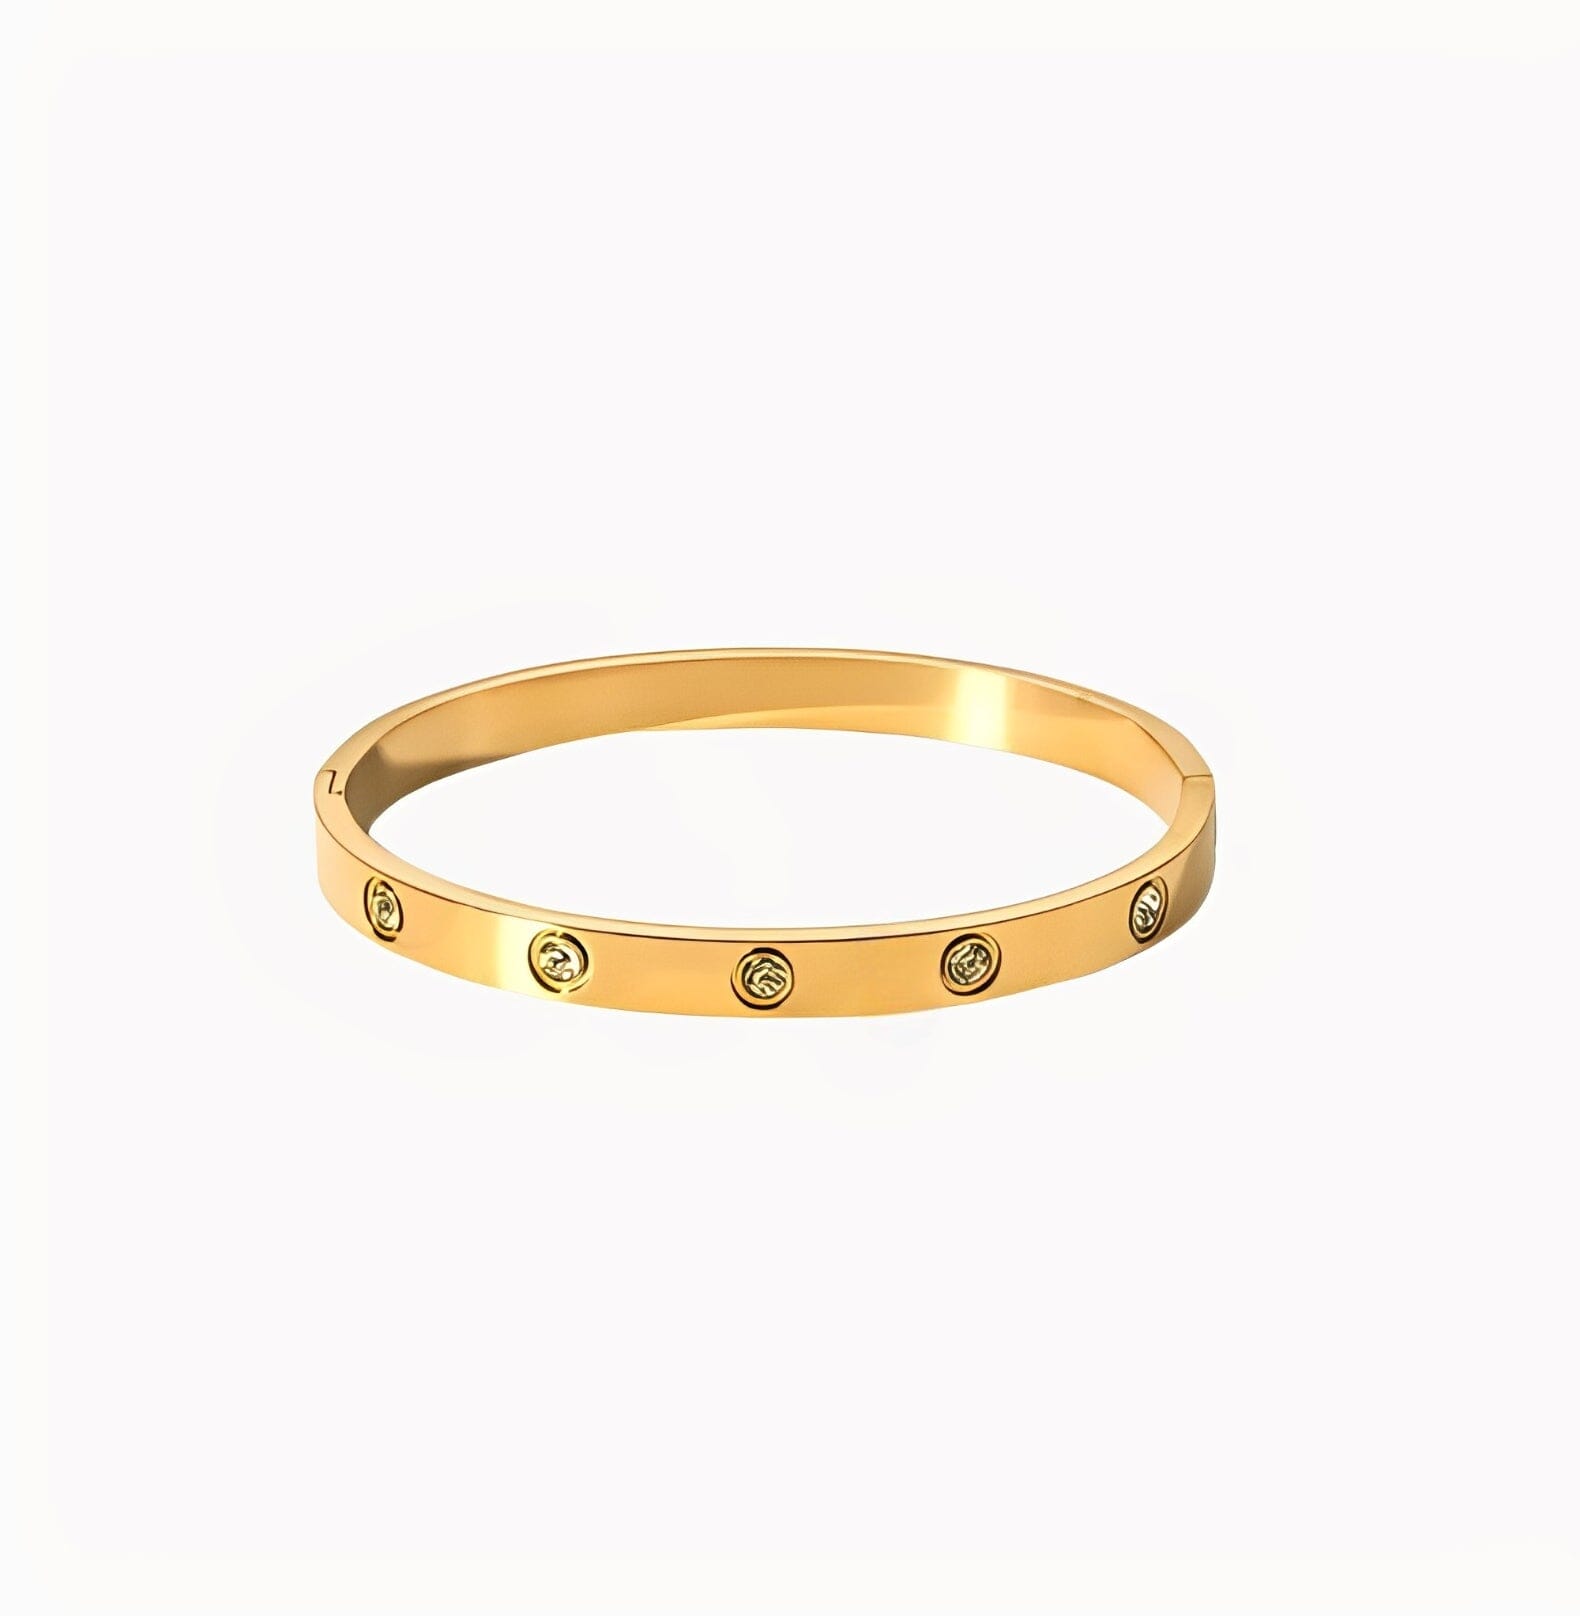 SOLITAIRE BANGLE BRACELET braclet Yubama Jewelry Online Store - The Elegant Designs of Gold and Silver ! 